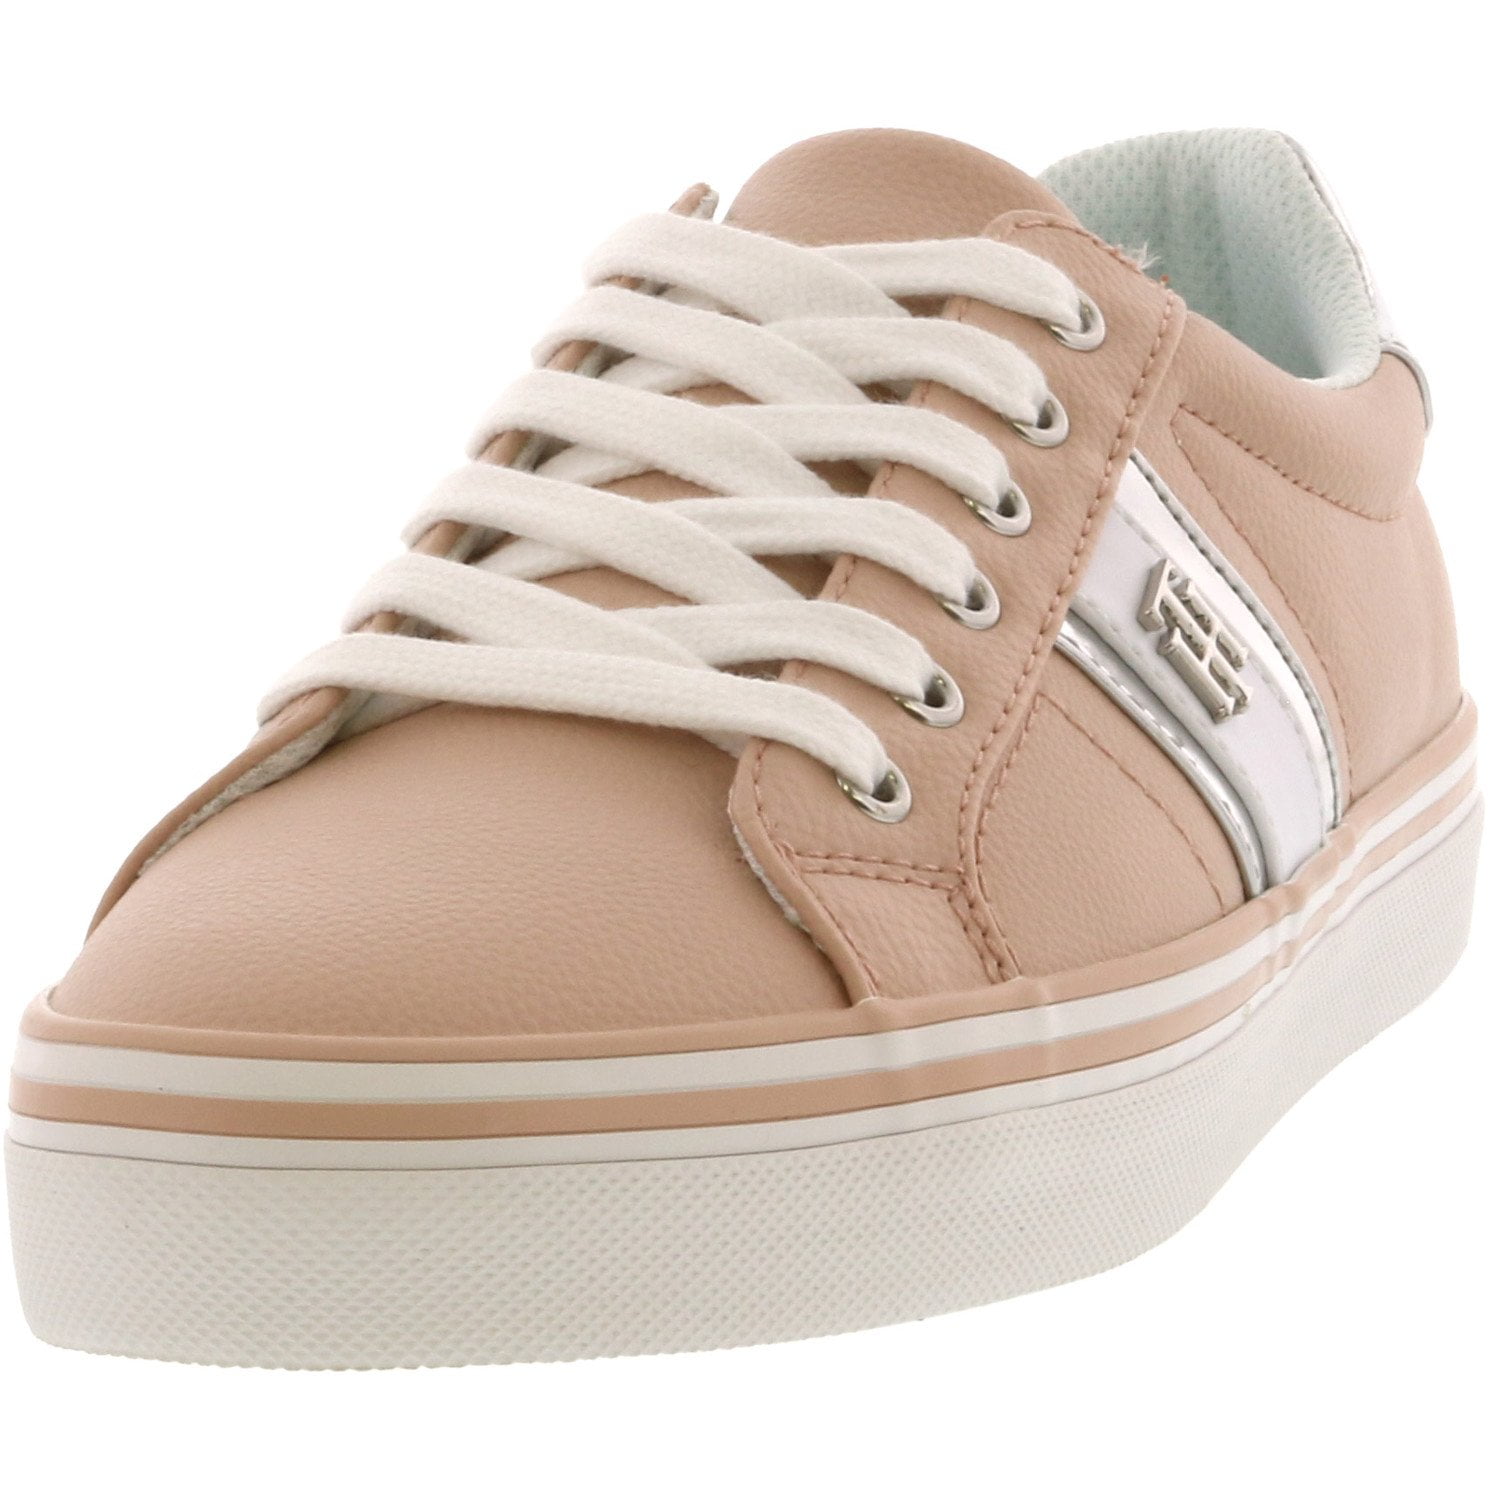 pink tommy hilfiger trainers